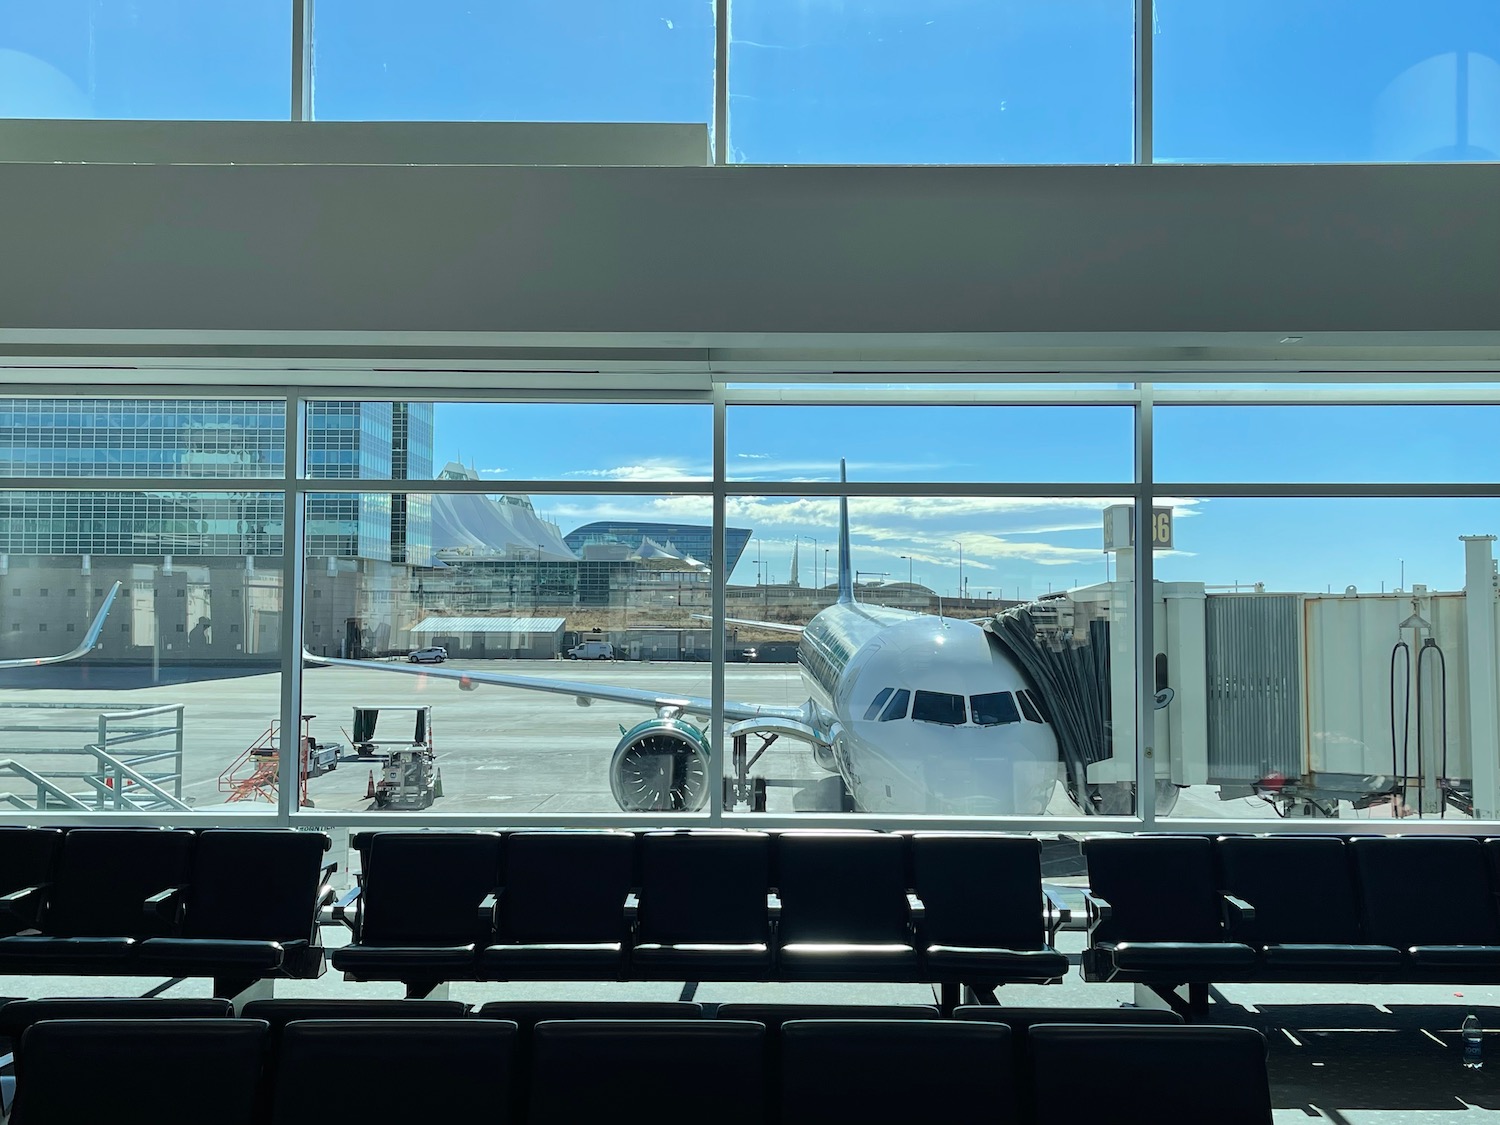 an airplane in an airport